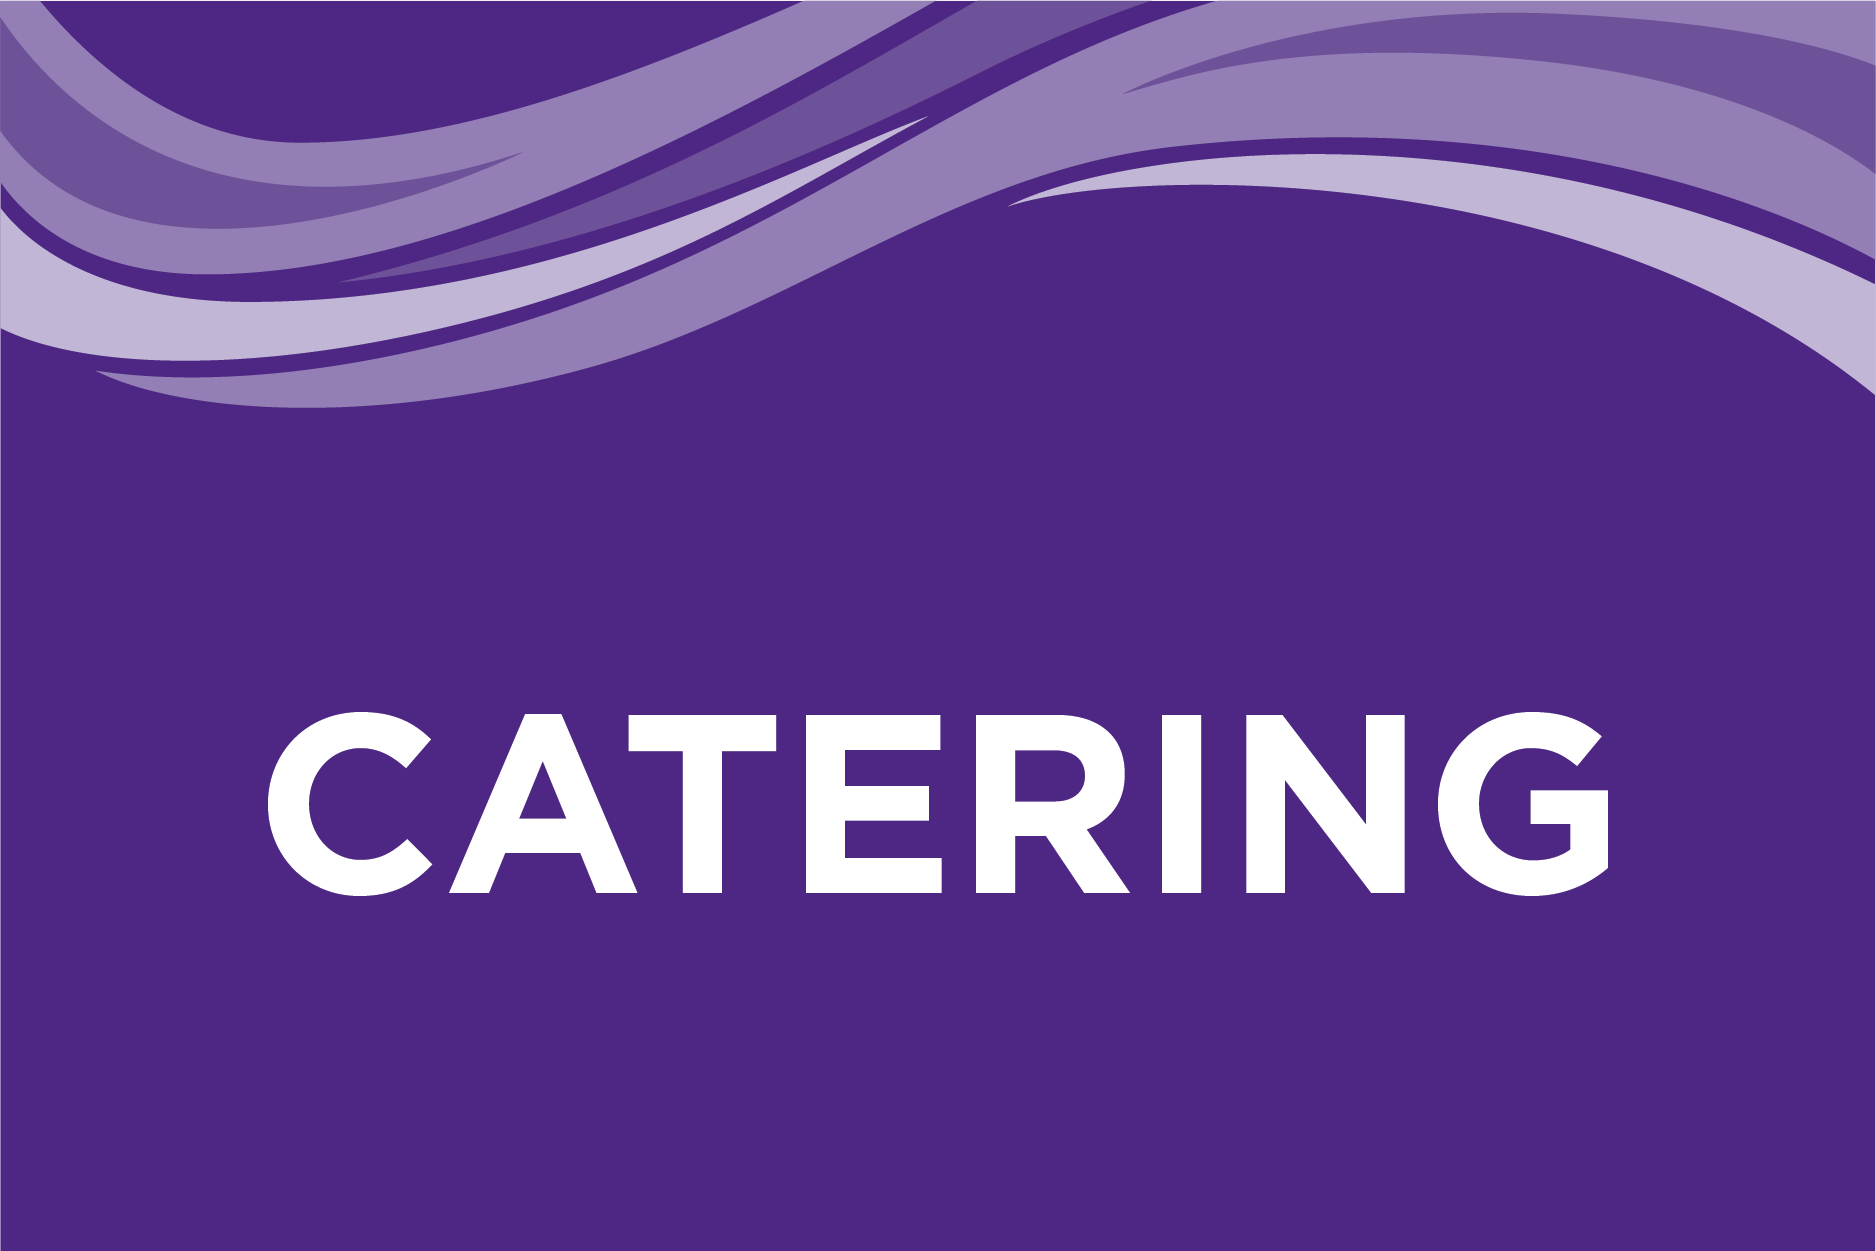 Catering options at UW-Whitewater